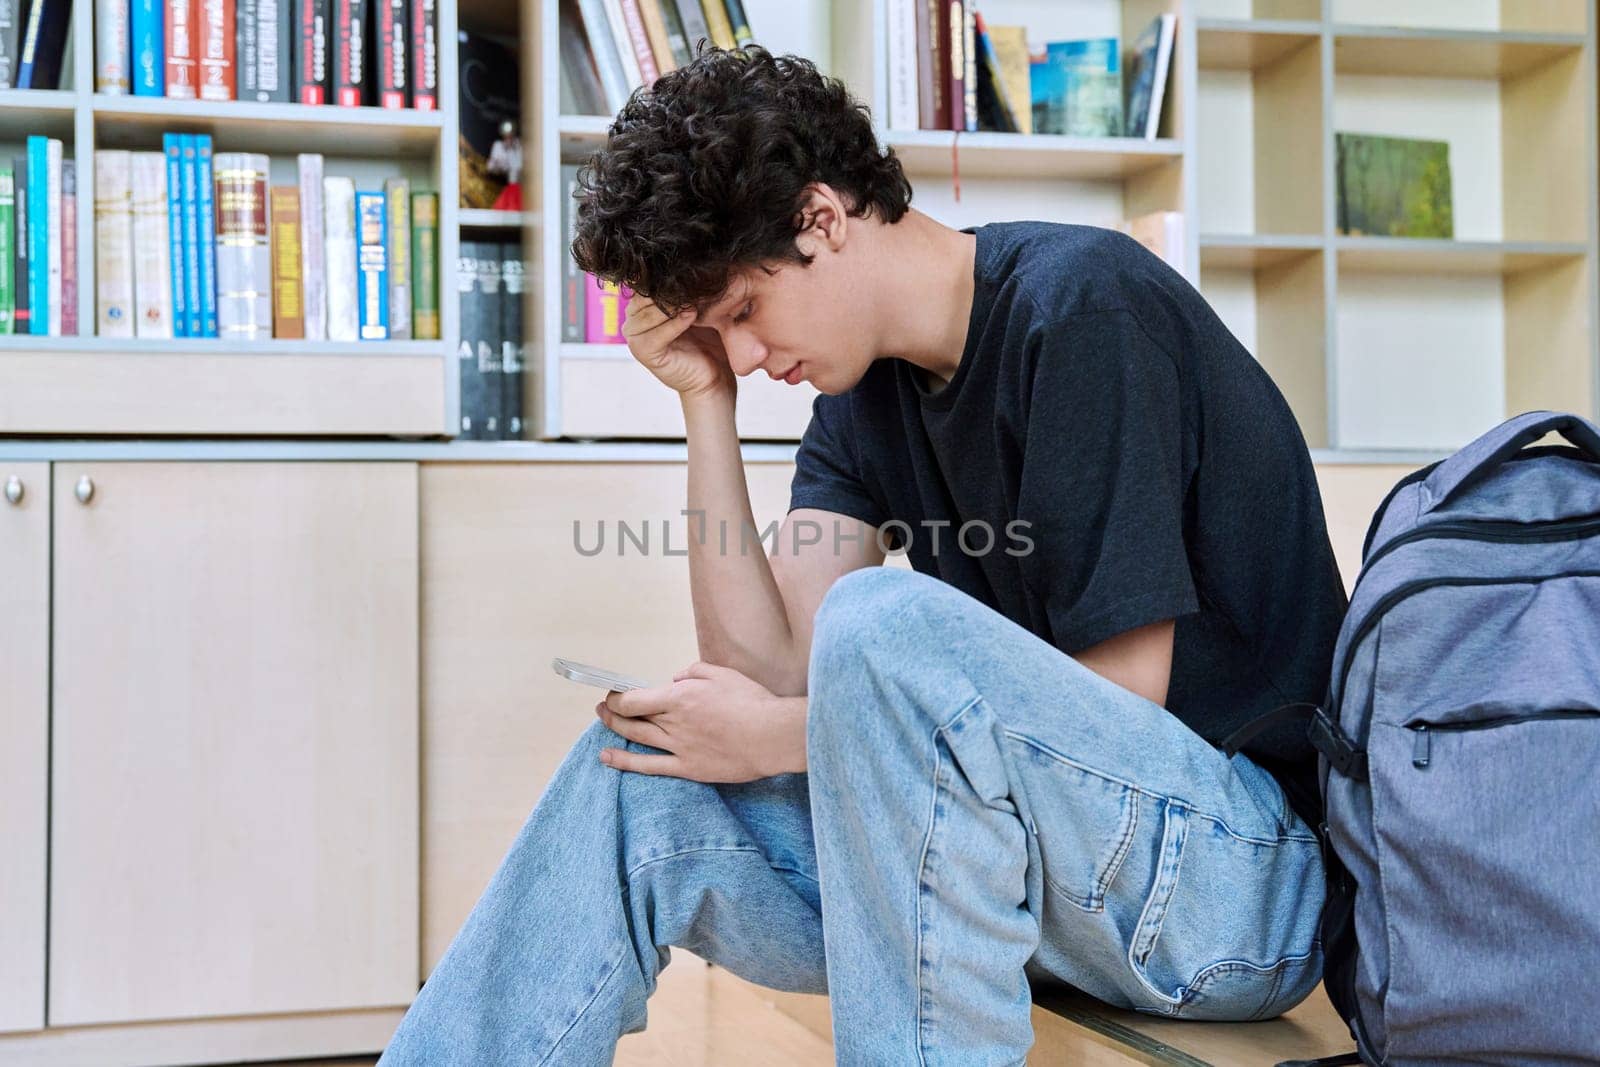 Sad upset young male college student looking at smartphone while sitting in classroom. Negative emotions, difficulties, troubles, youth concept